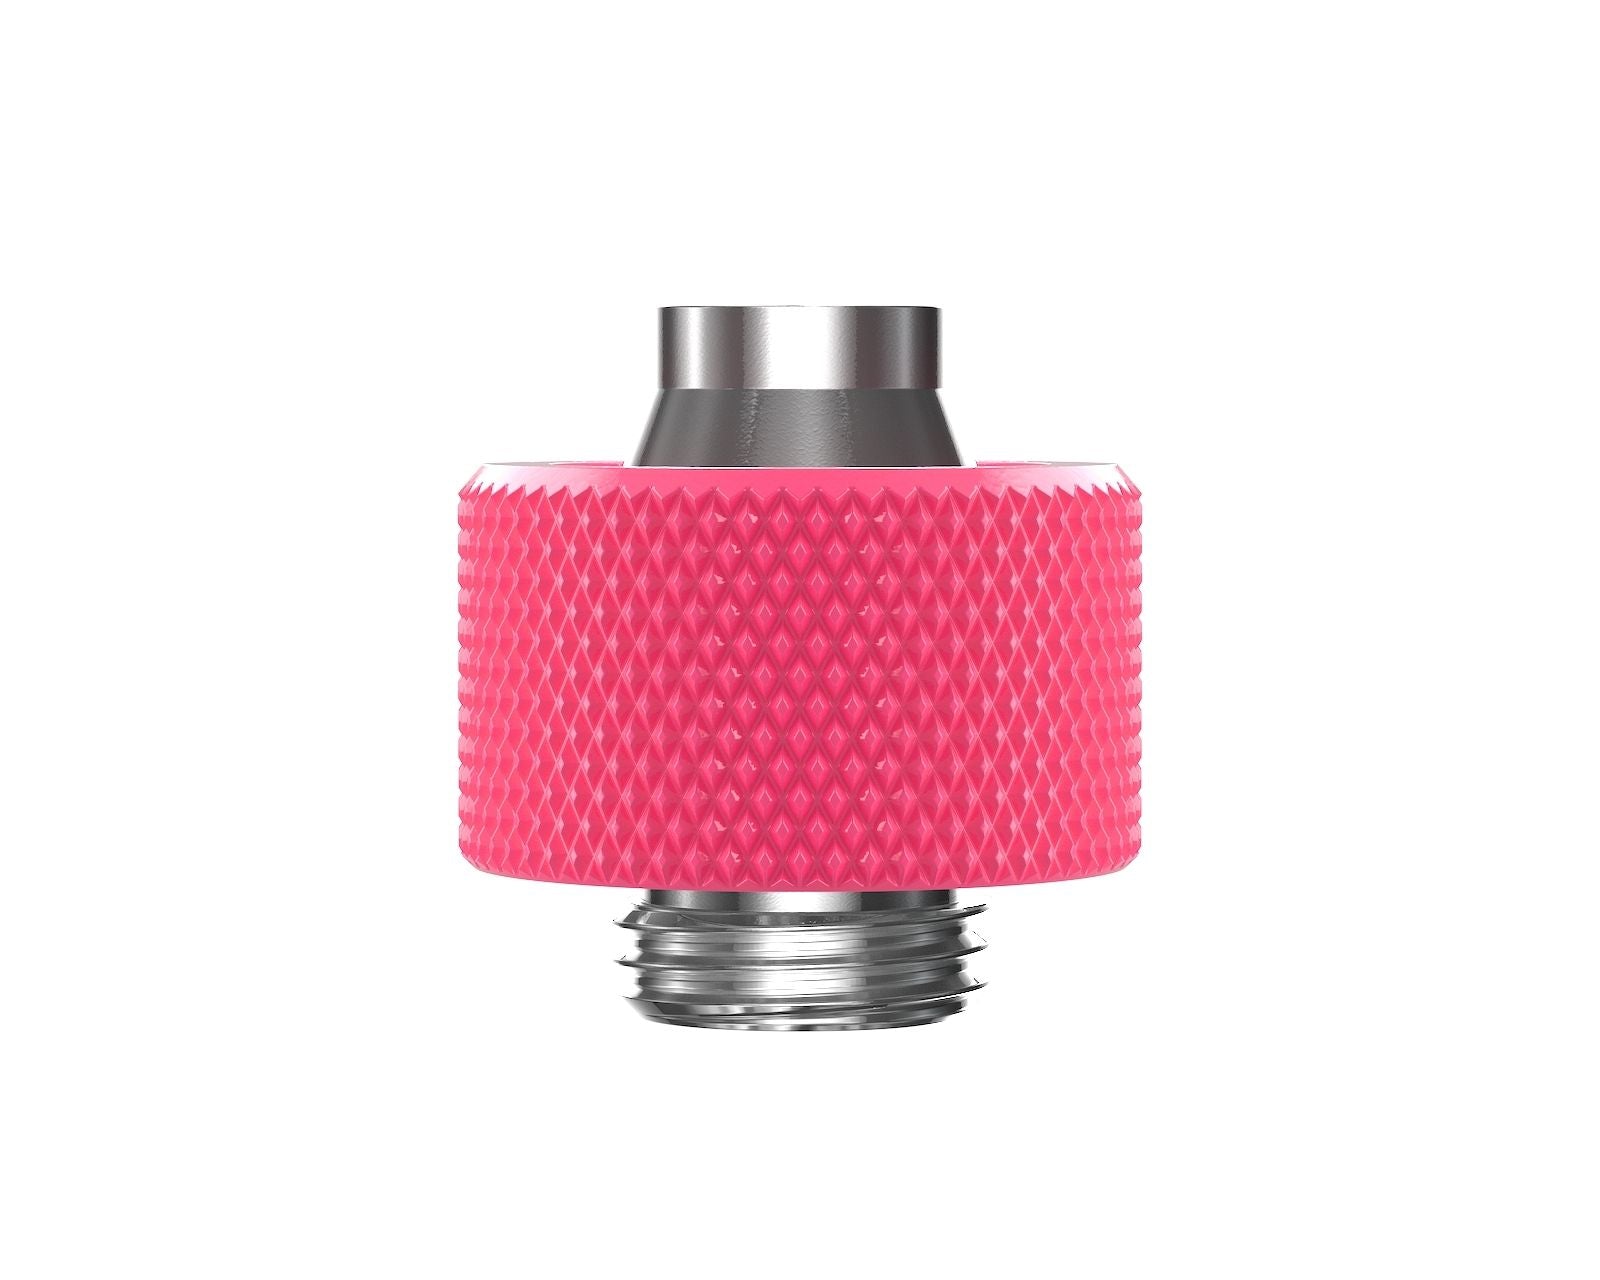 PrimoChill SecureFit SX - Premium Compression Fitting For 7/16in ID x 5/8in OD Flexible Tubing (F-SFSX758) - Available in 20+ Colors, Custom Watercooling Loop Ready - UV Pink